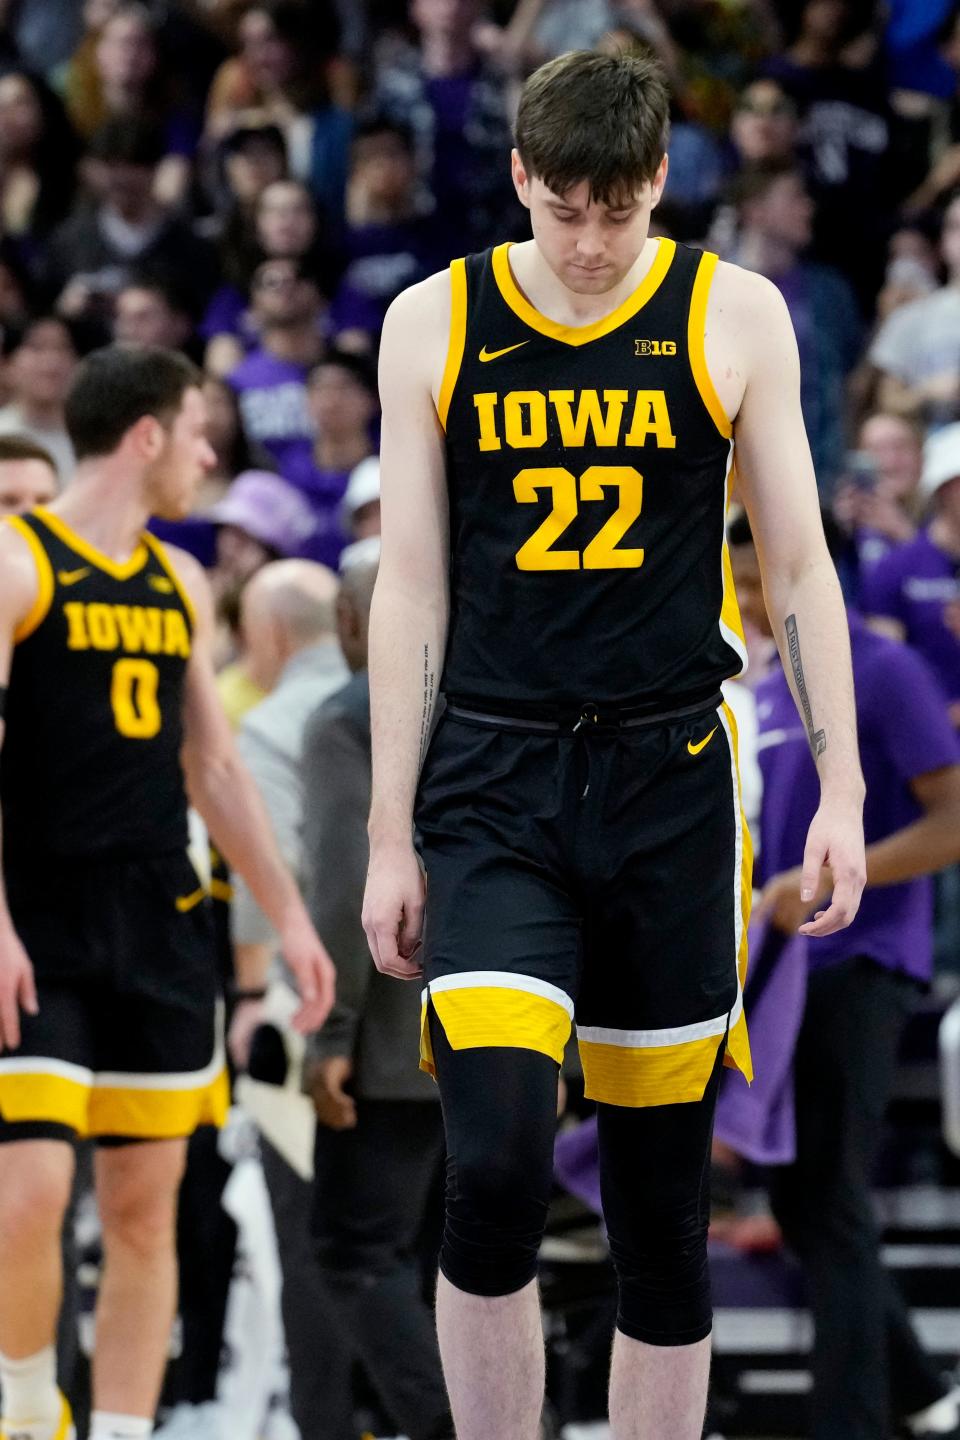 Iowa forward Patrick McCaffery walks on the court during the first half of an NCAA college basketball game against Northwestern in Evanston, Ill., Sunday, Feb. 19, 2023.